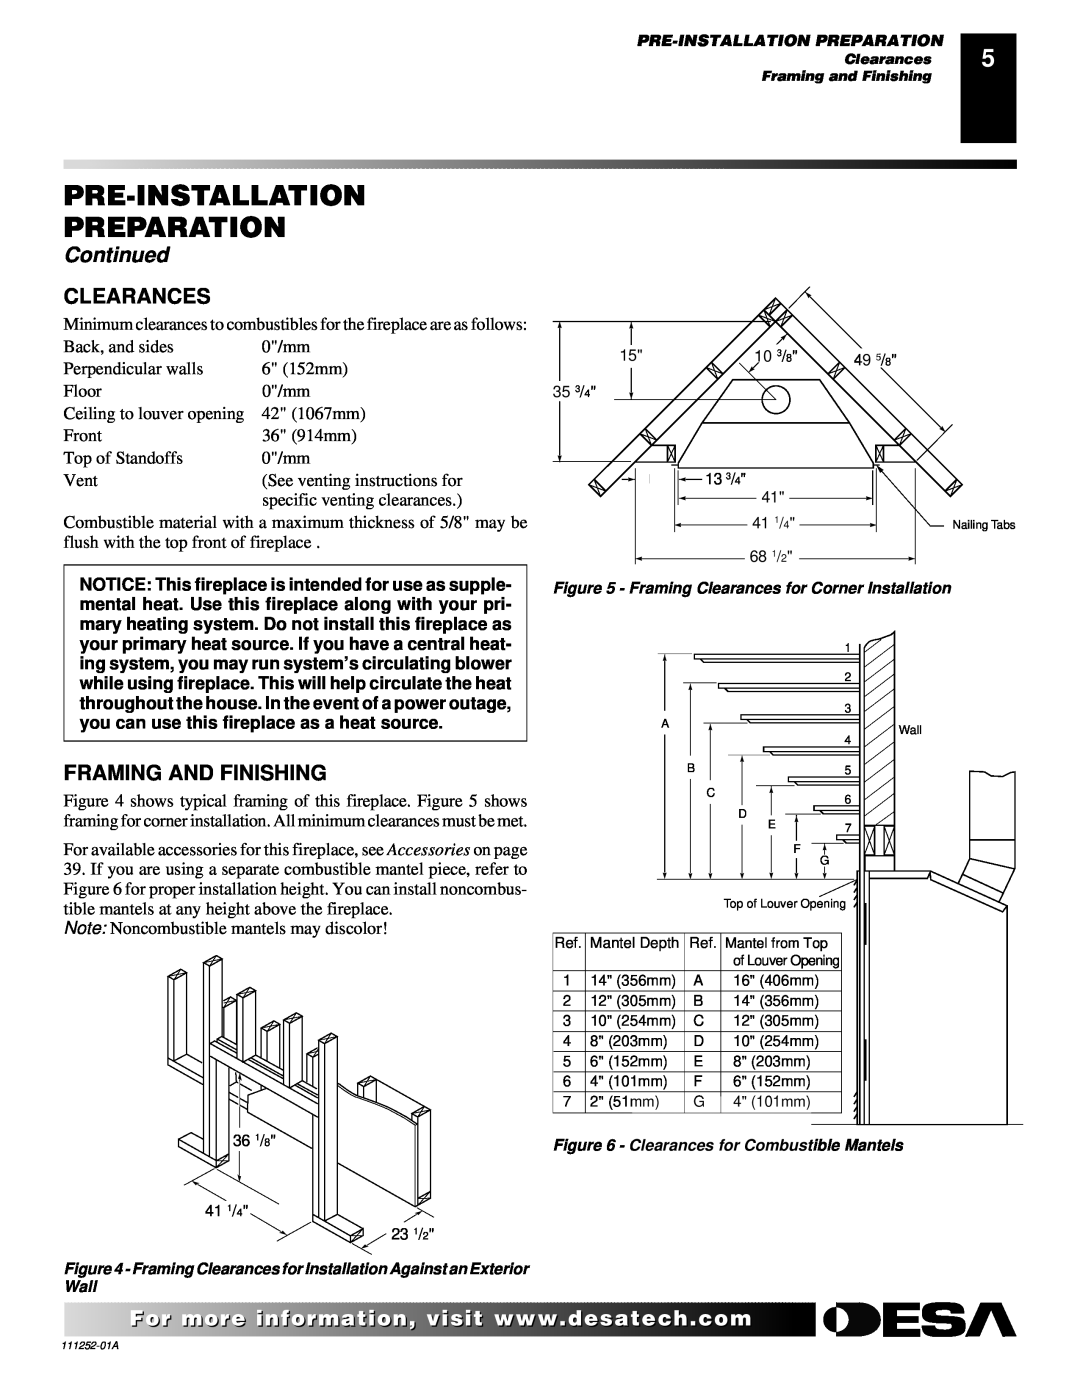 Desa CHDV36NRA installation manual Clearances, Framing And Finishing, Pre-Installation Preparation, Continued 